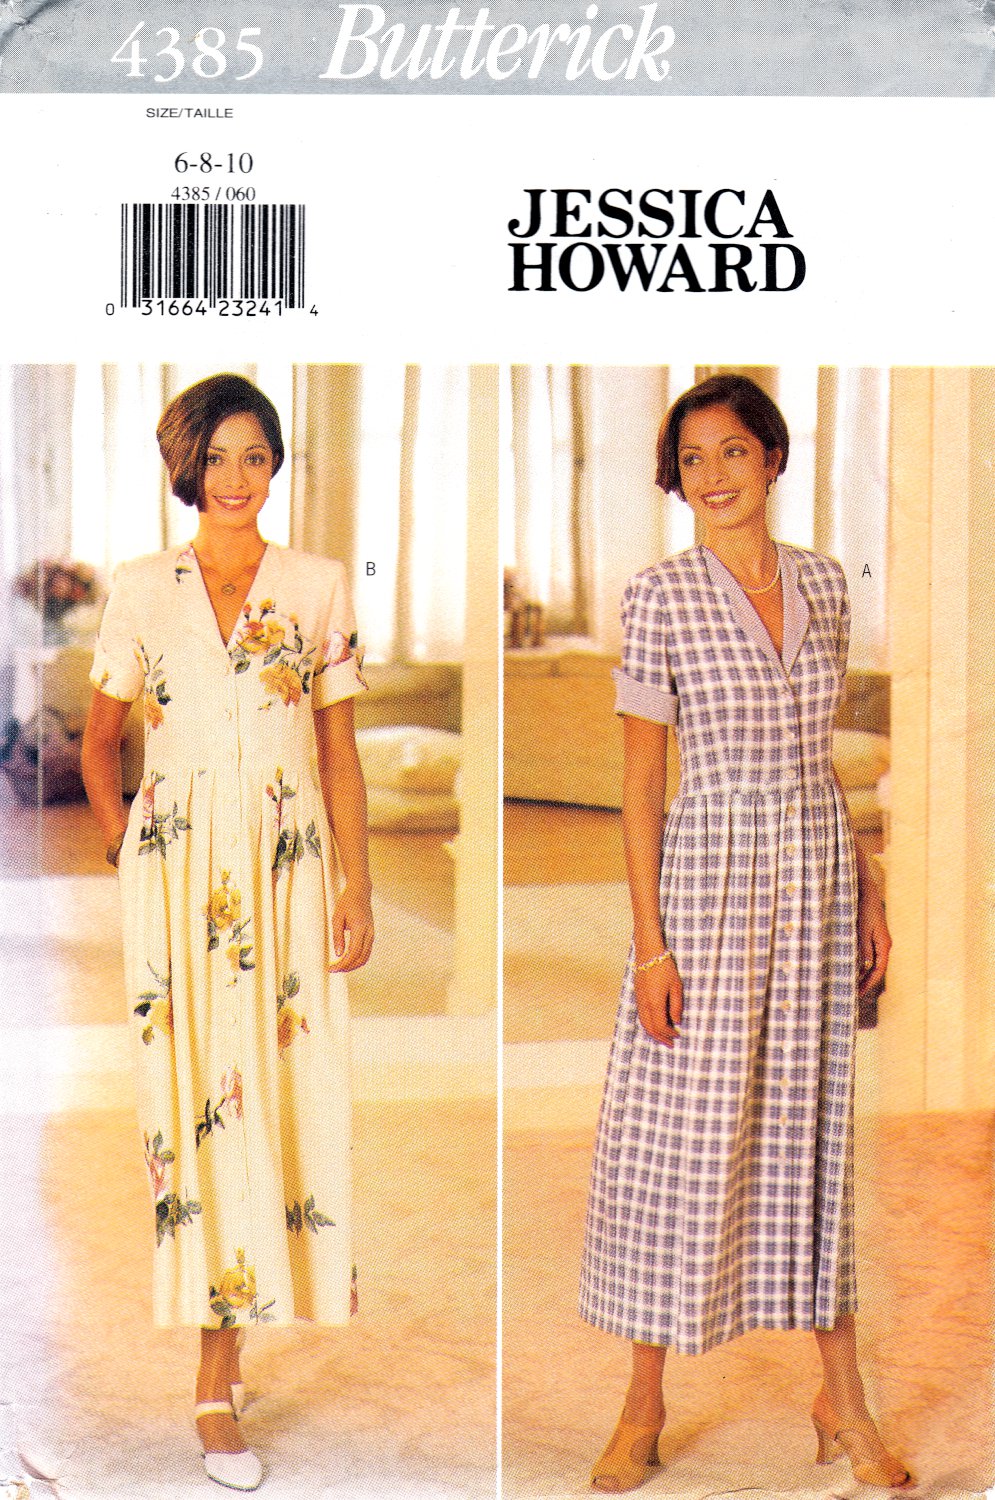 Butterick 4385 Misses Petite Dress Above Ankle Length Sewing Pattern sizes 6-8-10